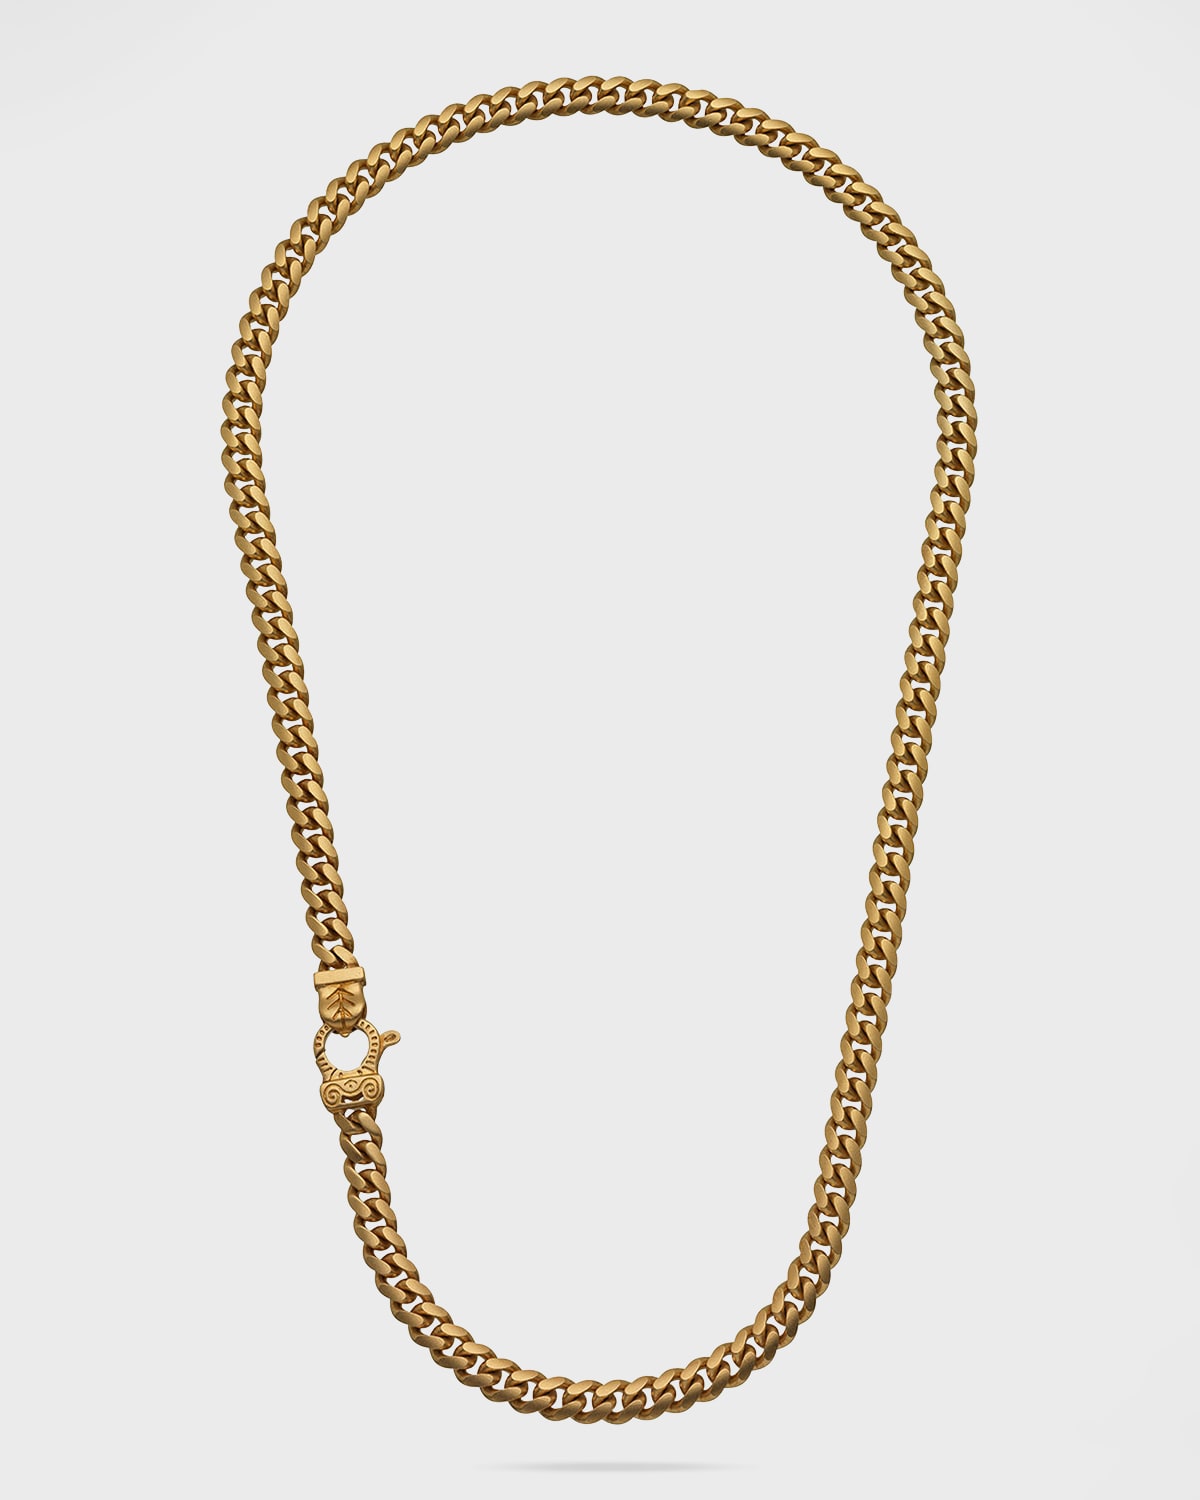 Marco Dal Maso Flaming Tongue Link Necklace, Gold